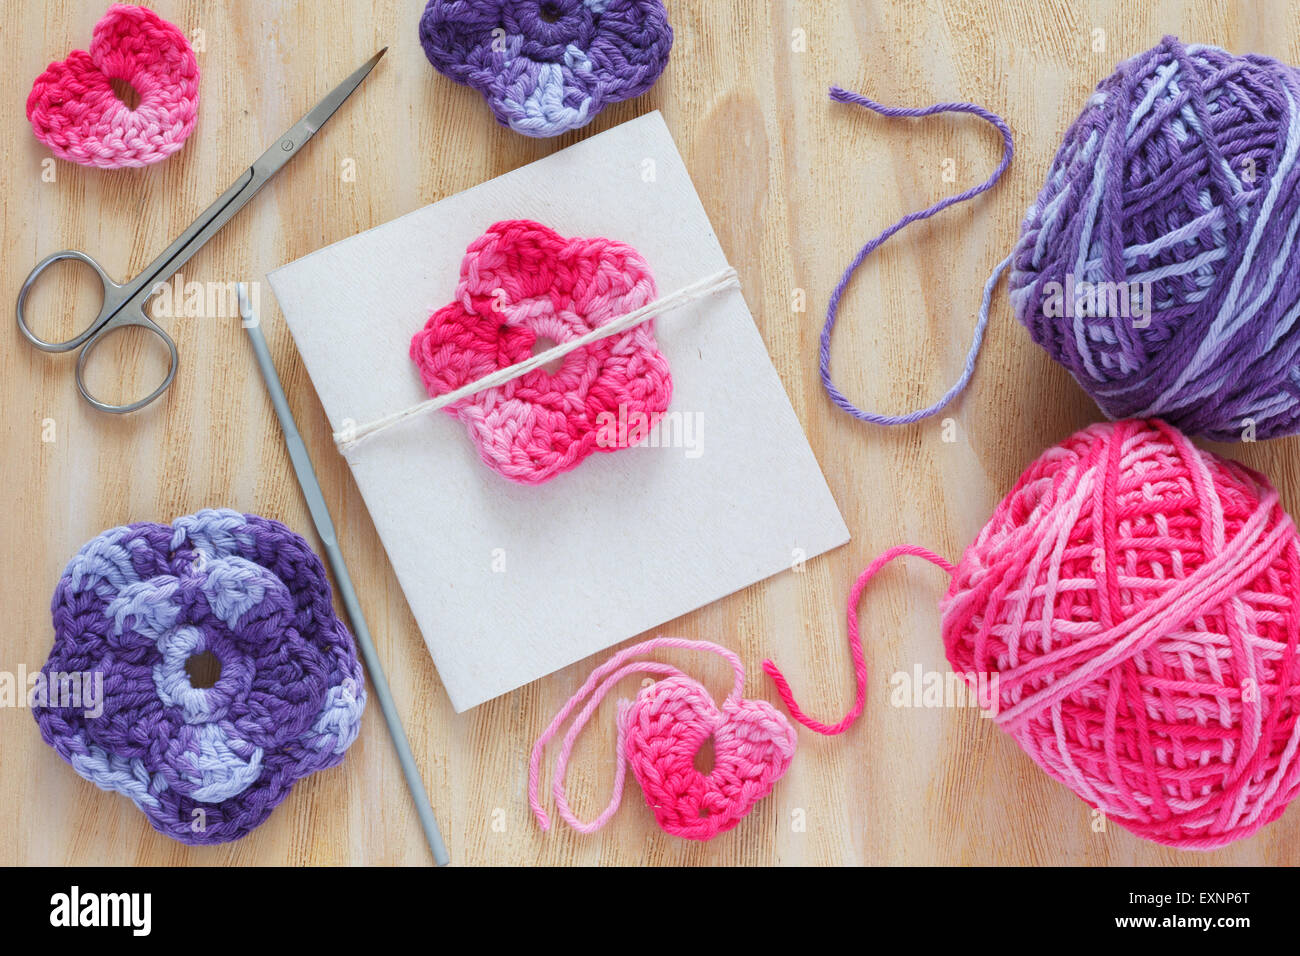 Handmade colorful crochet flowers and heart for decoration of greetings card with skein and scissors on wooden table. Selective Stock Photo